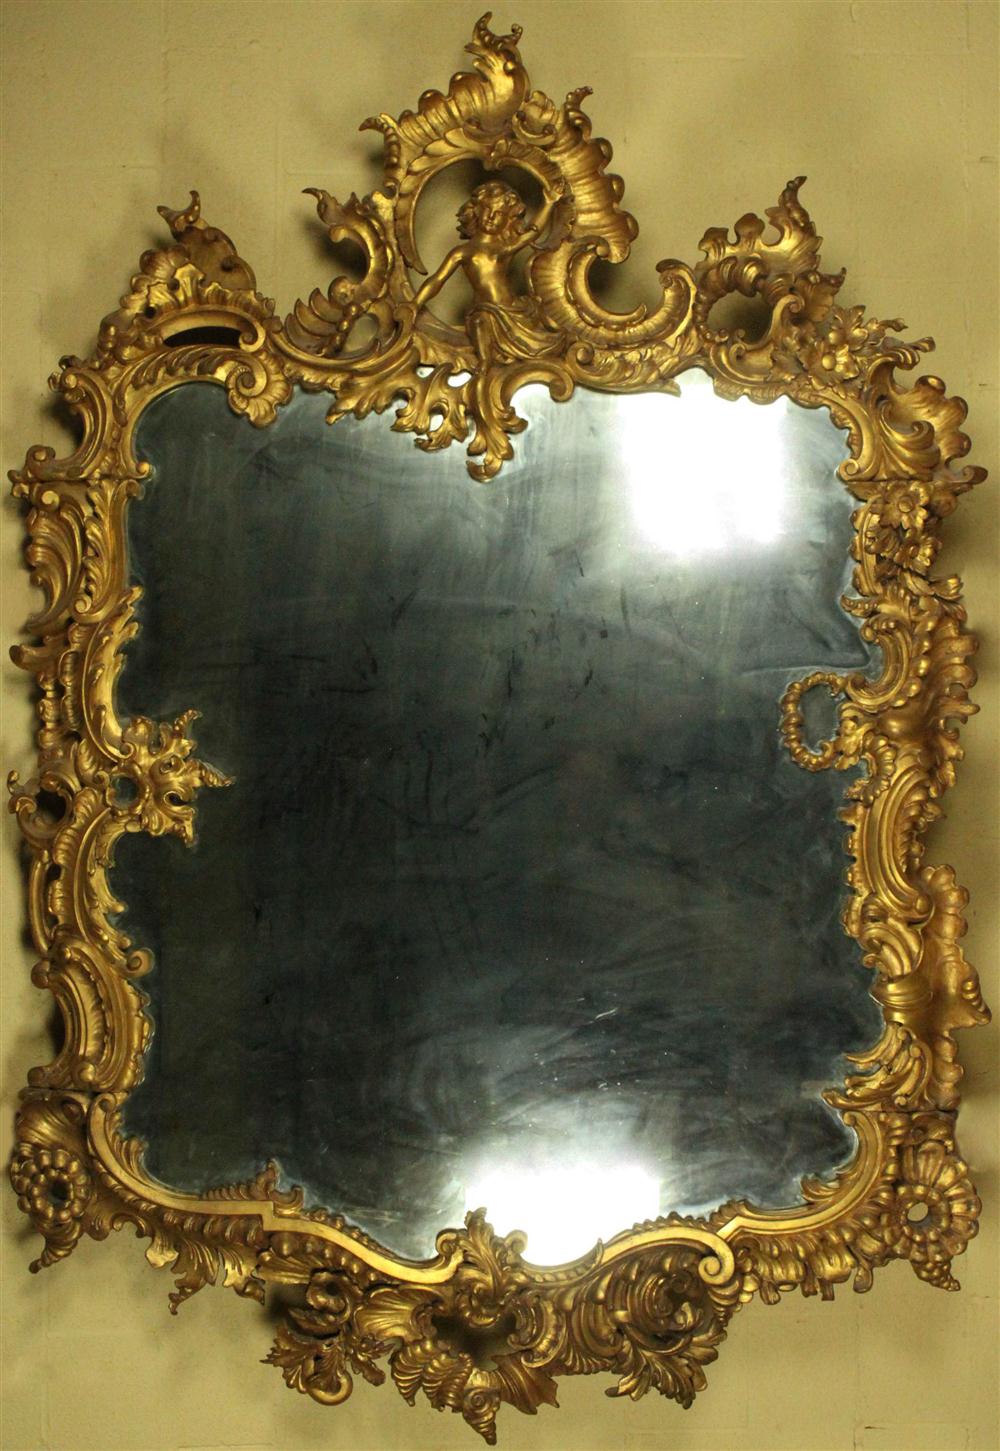 MONUMENTAL ROCOCO STYLE GILDED